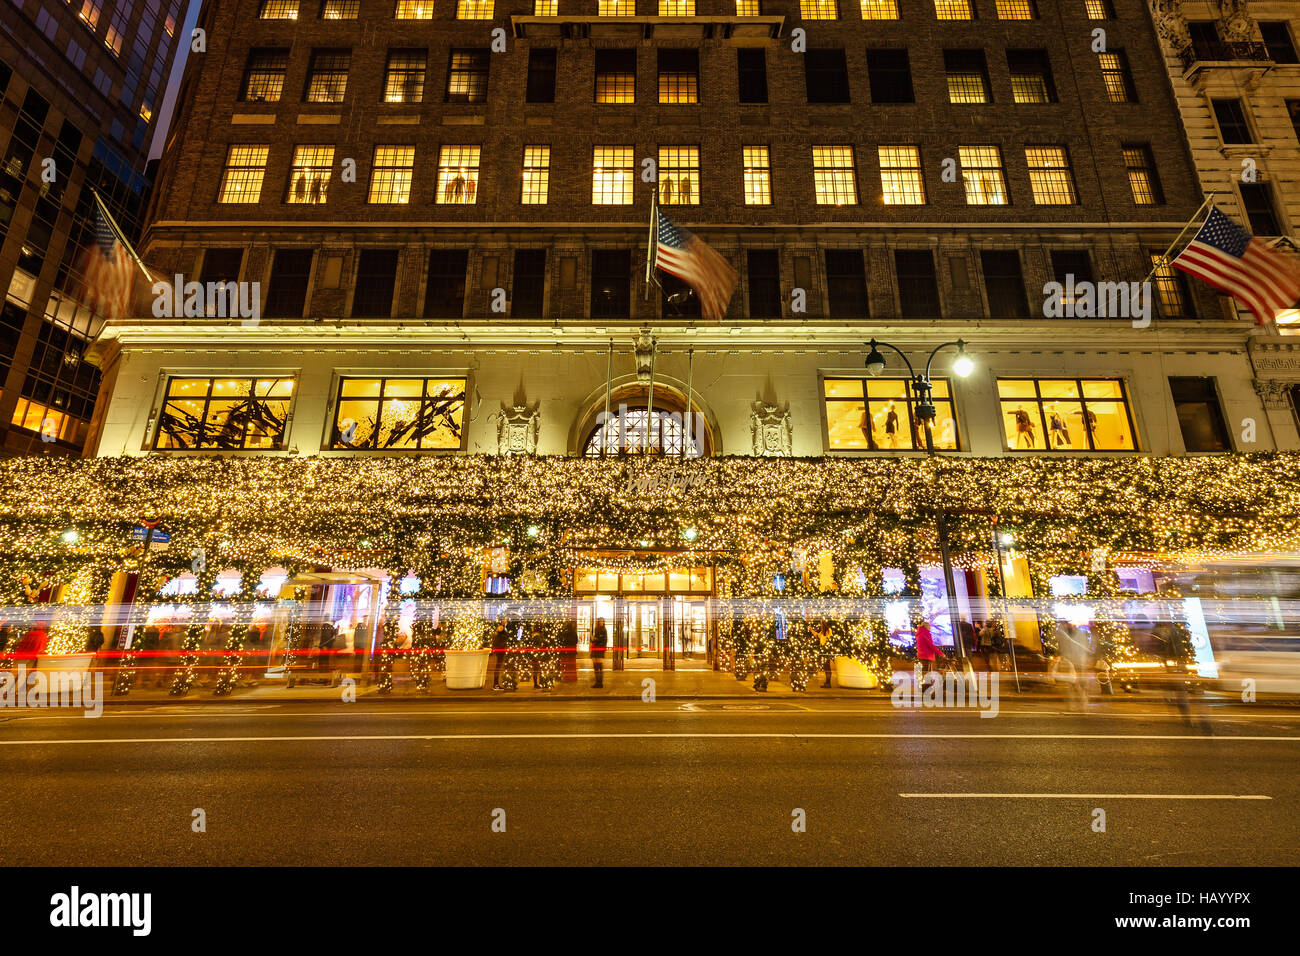 Lord & Taylor (Department Store) with Christmas lights and holiday ...